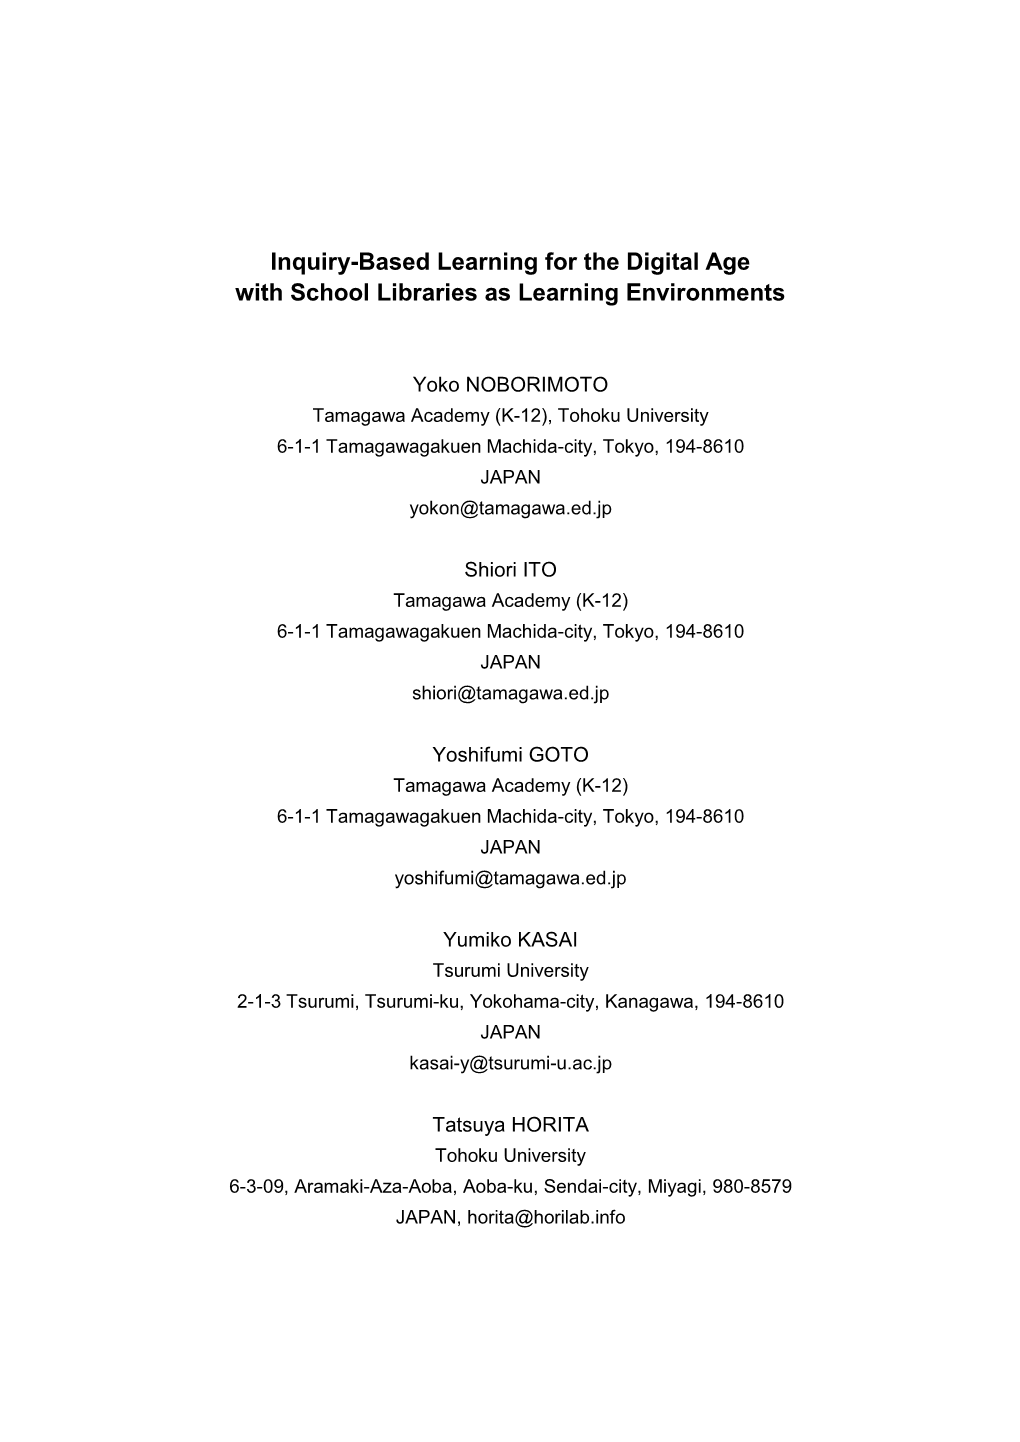 Inquiry-Based Learning for the Digital Age with School Libraries As Learning Environments